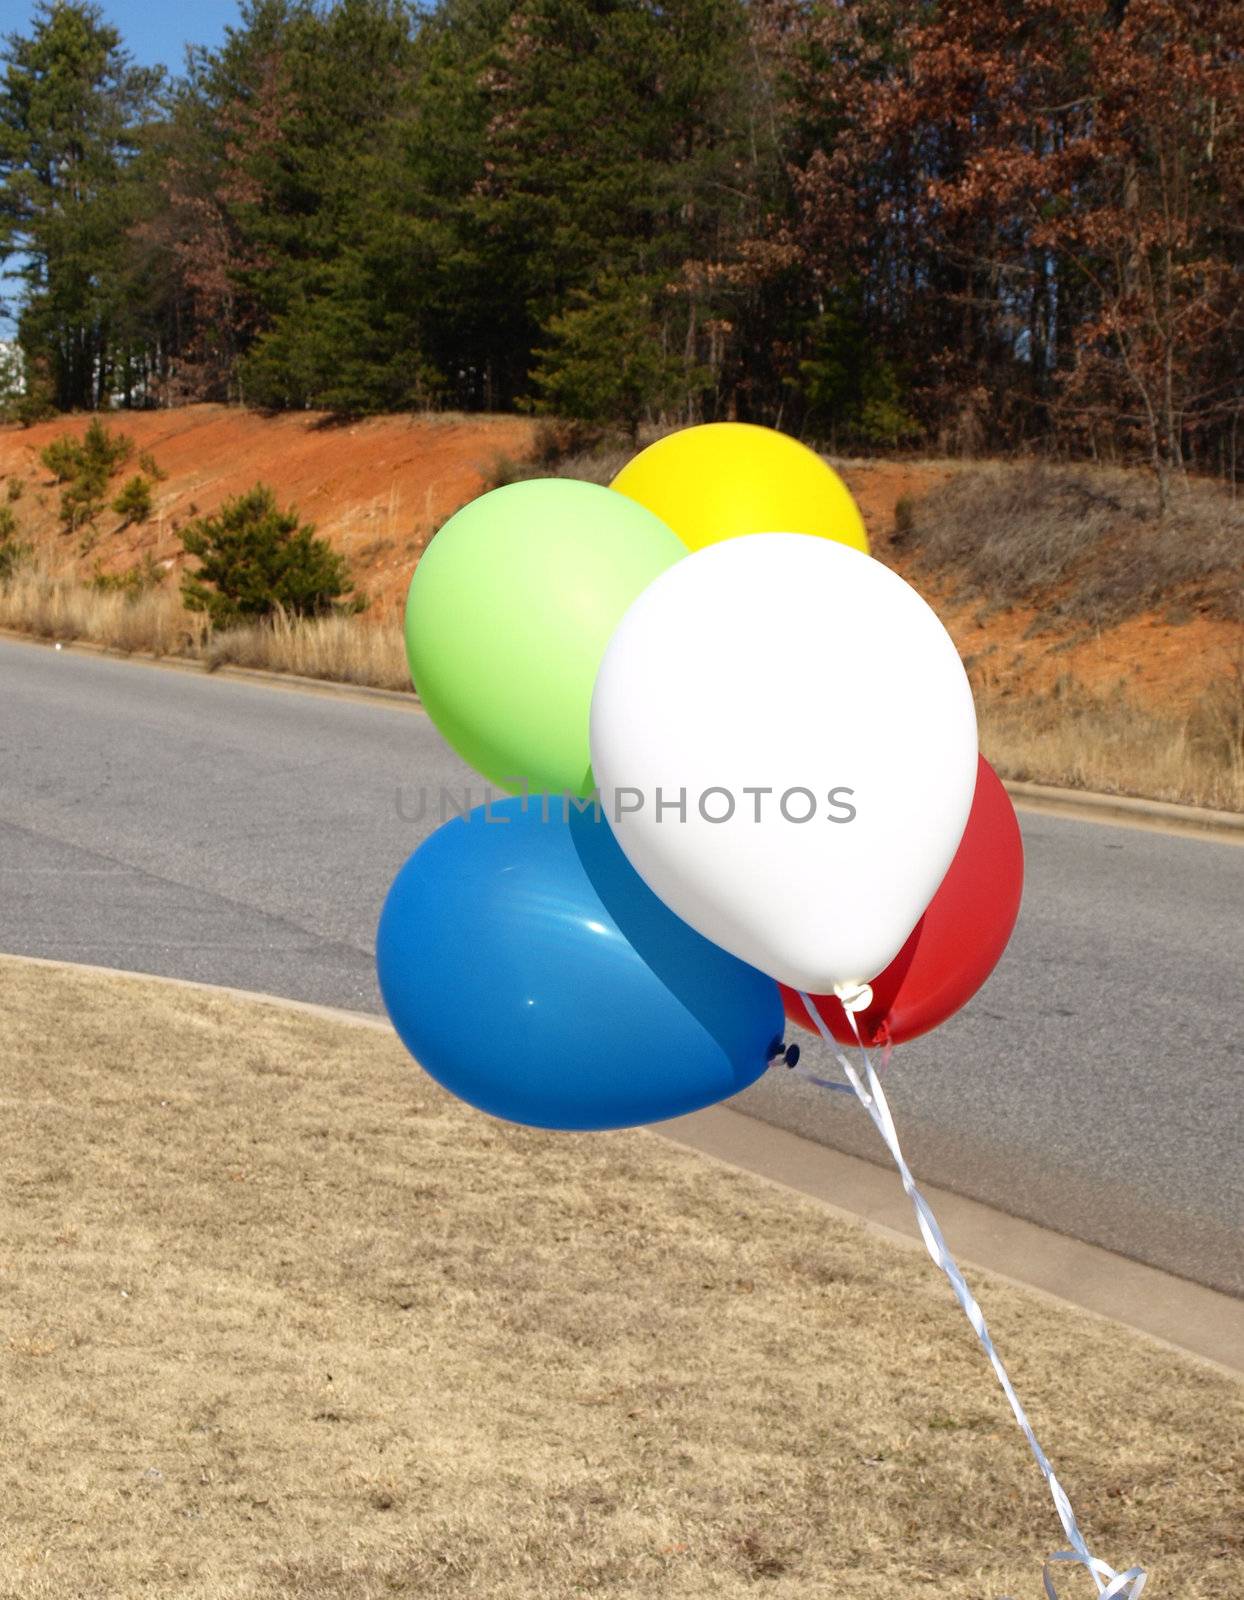 Balloon on the side of a rural road